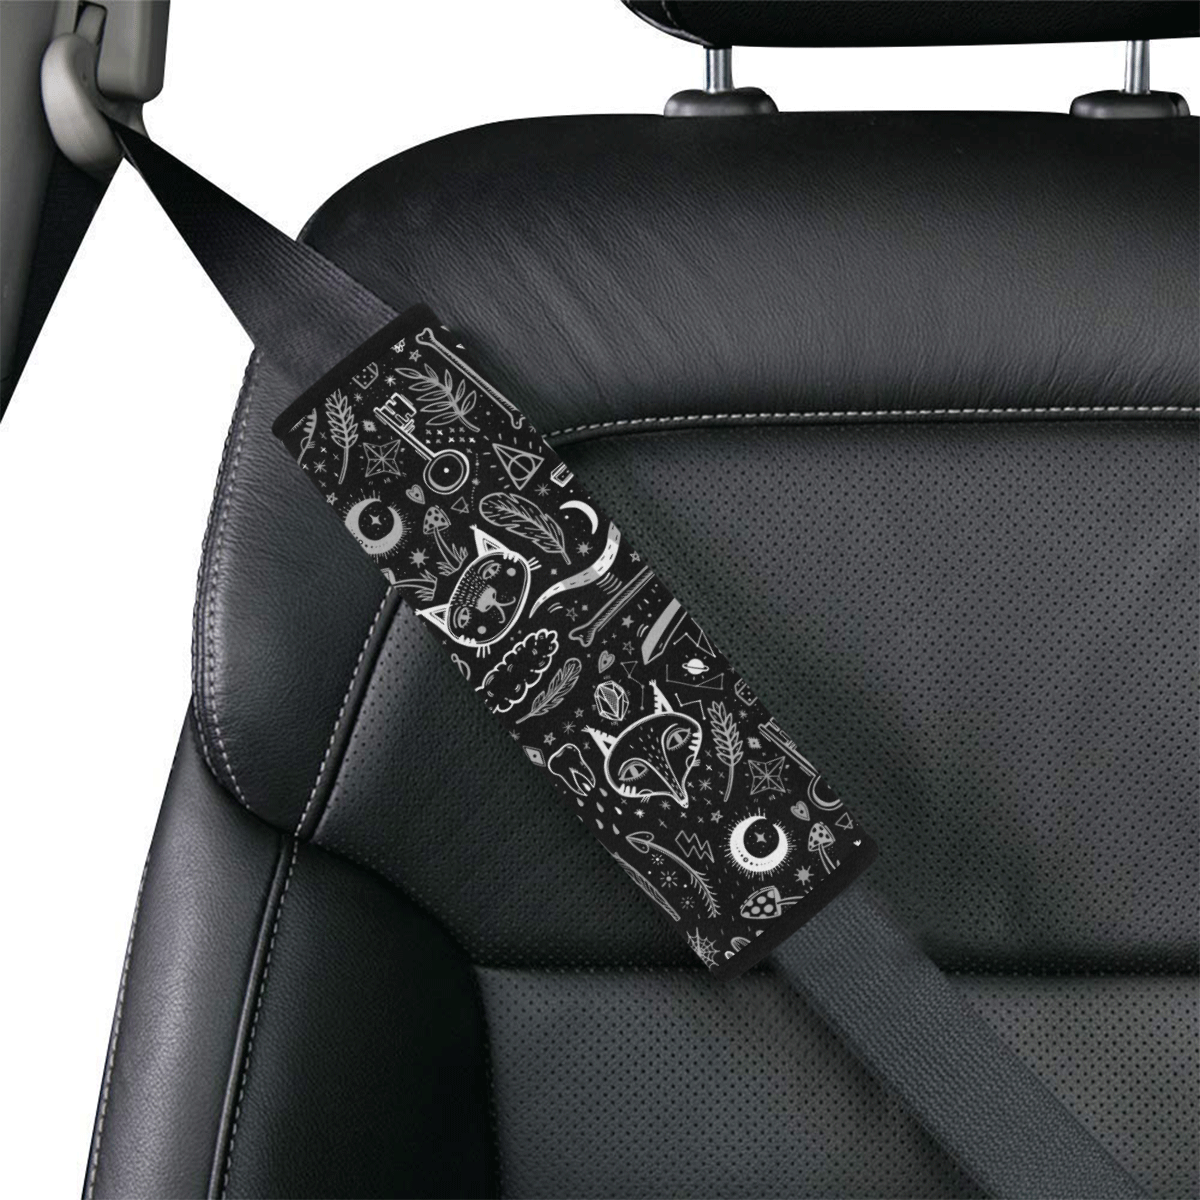 Funny Nature Of Life Sketchnotes Pattern 4 Car Seat Belt Cover 7''x8.5''